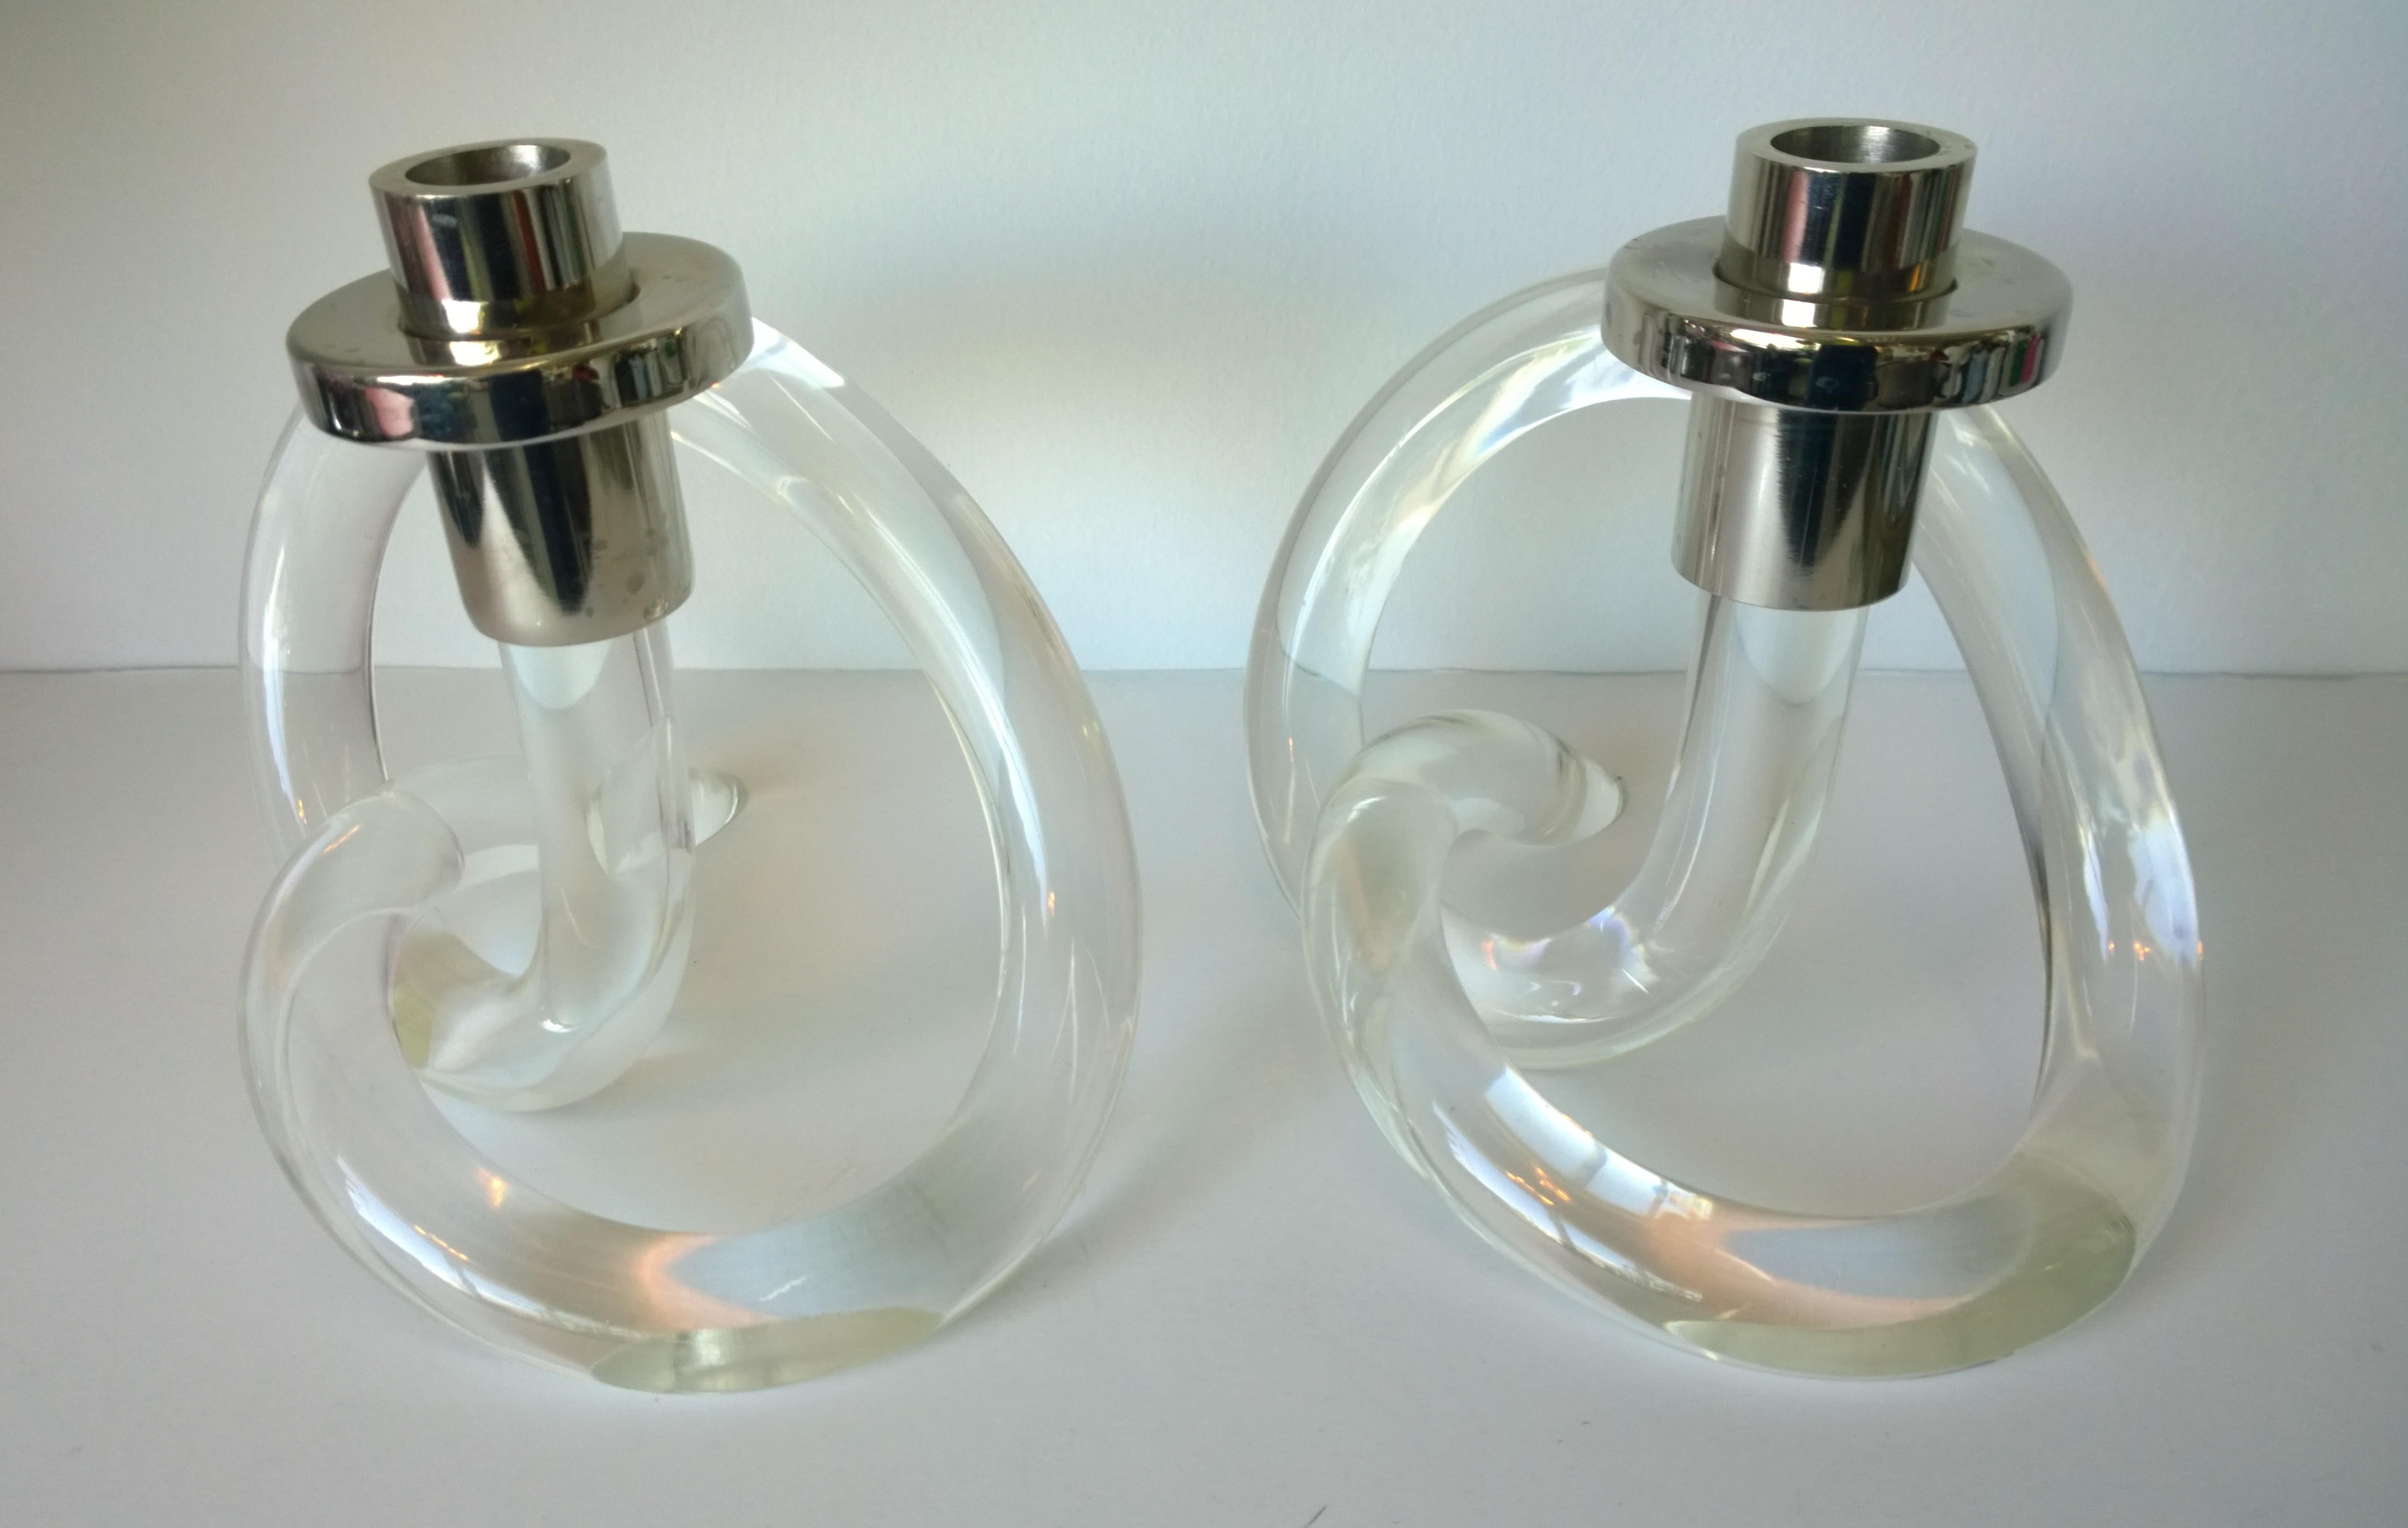 Offered is a pair of Mid-Century Modern Dorothy Thorpe elegant Lucite and silver plated accent 